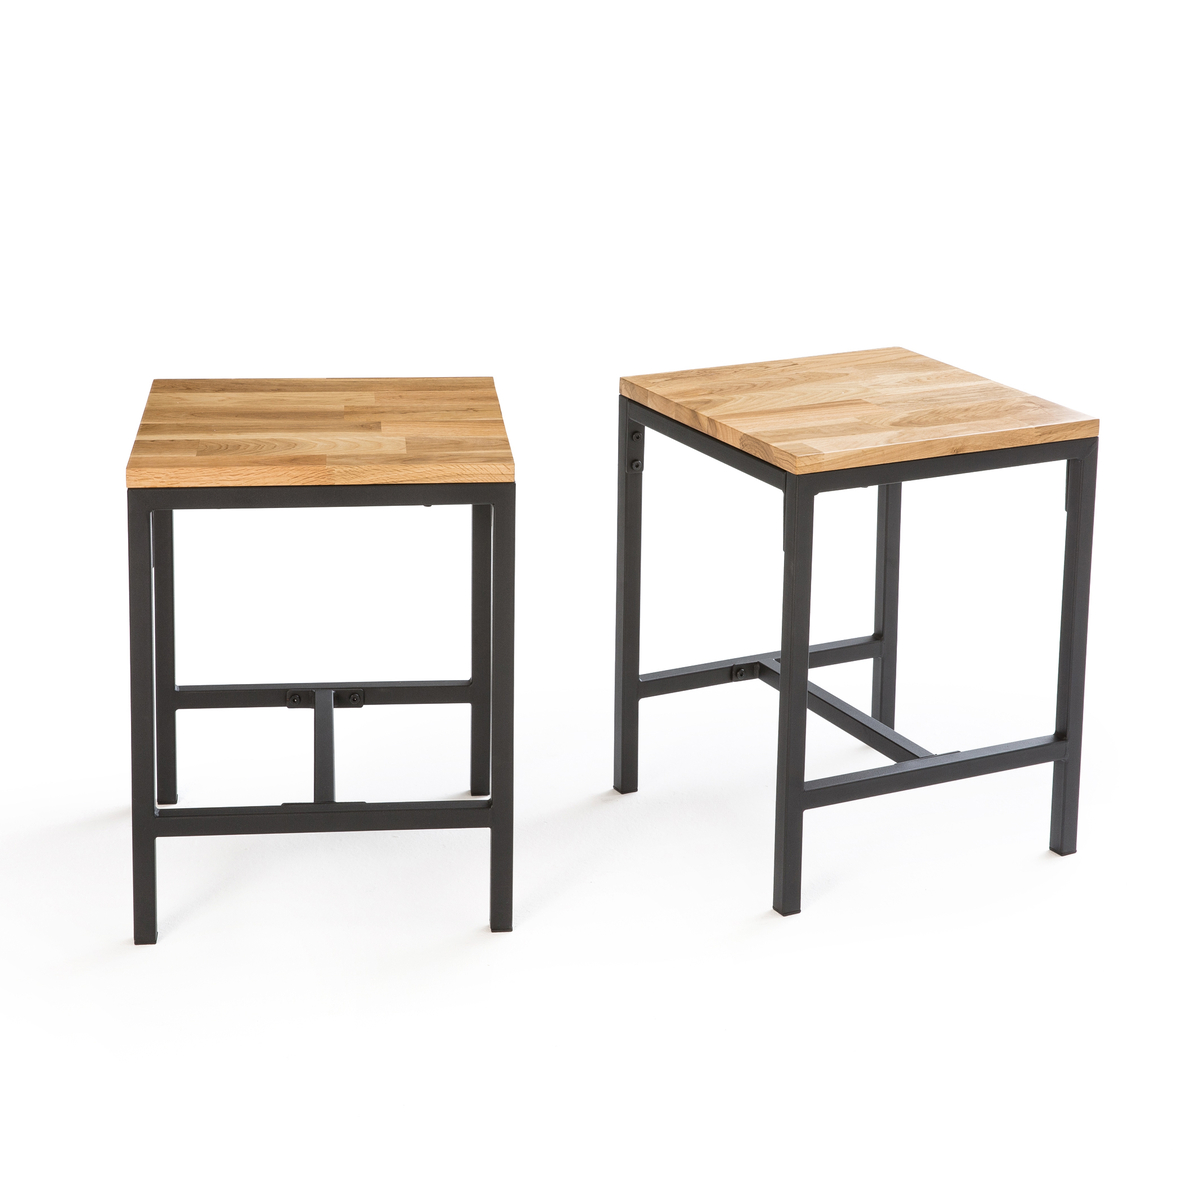 Set of 2 Hiba Stools in Solid Oak and Steel